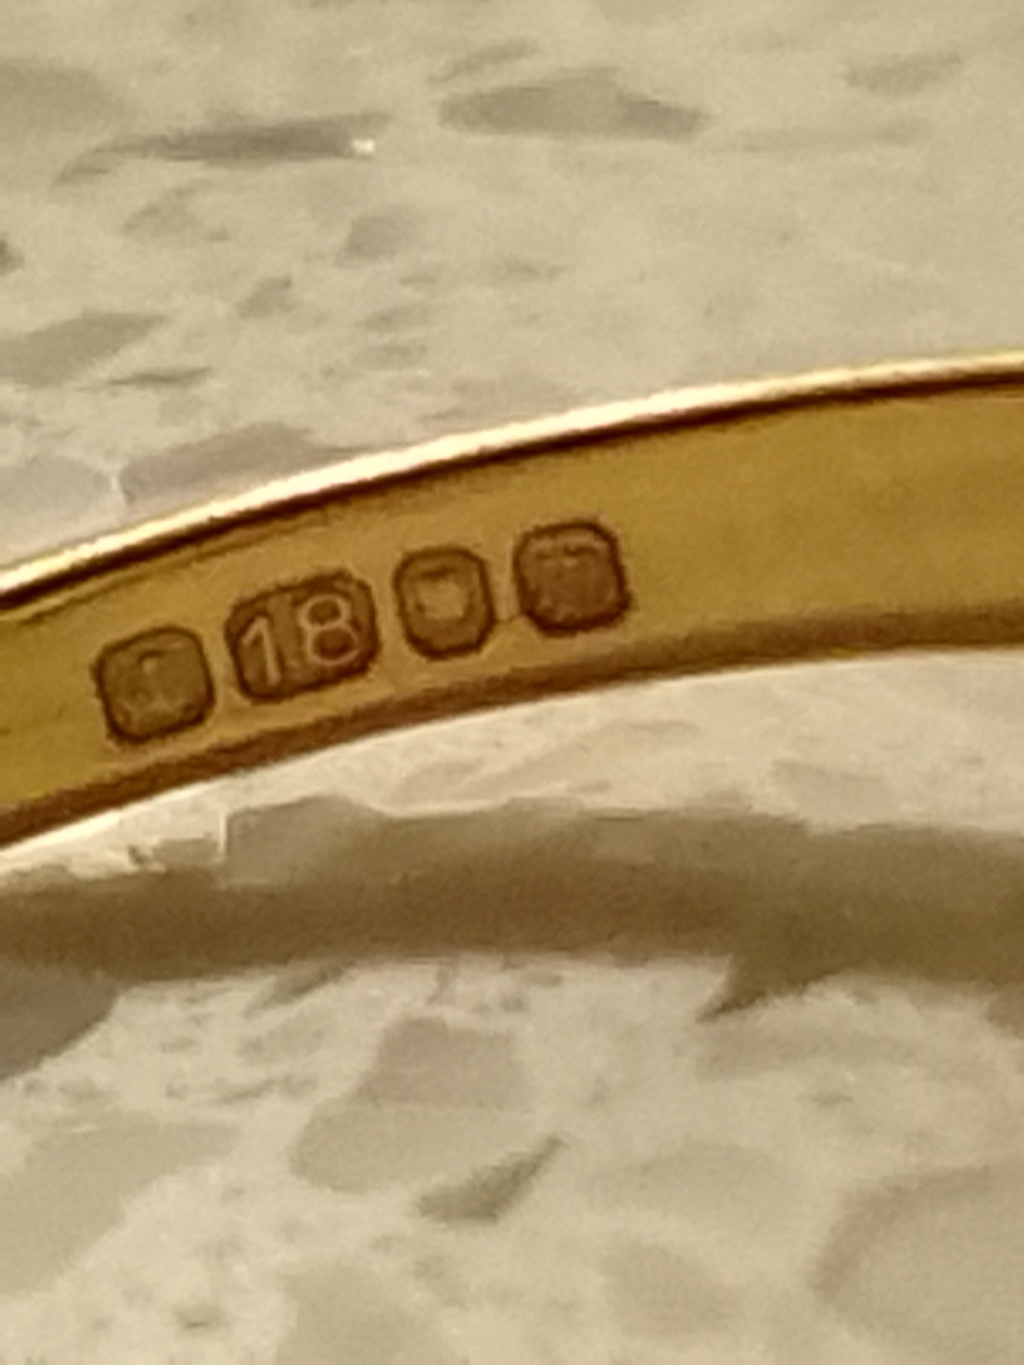 Identify ring markings... particularly C16 meaning Img_2066